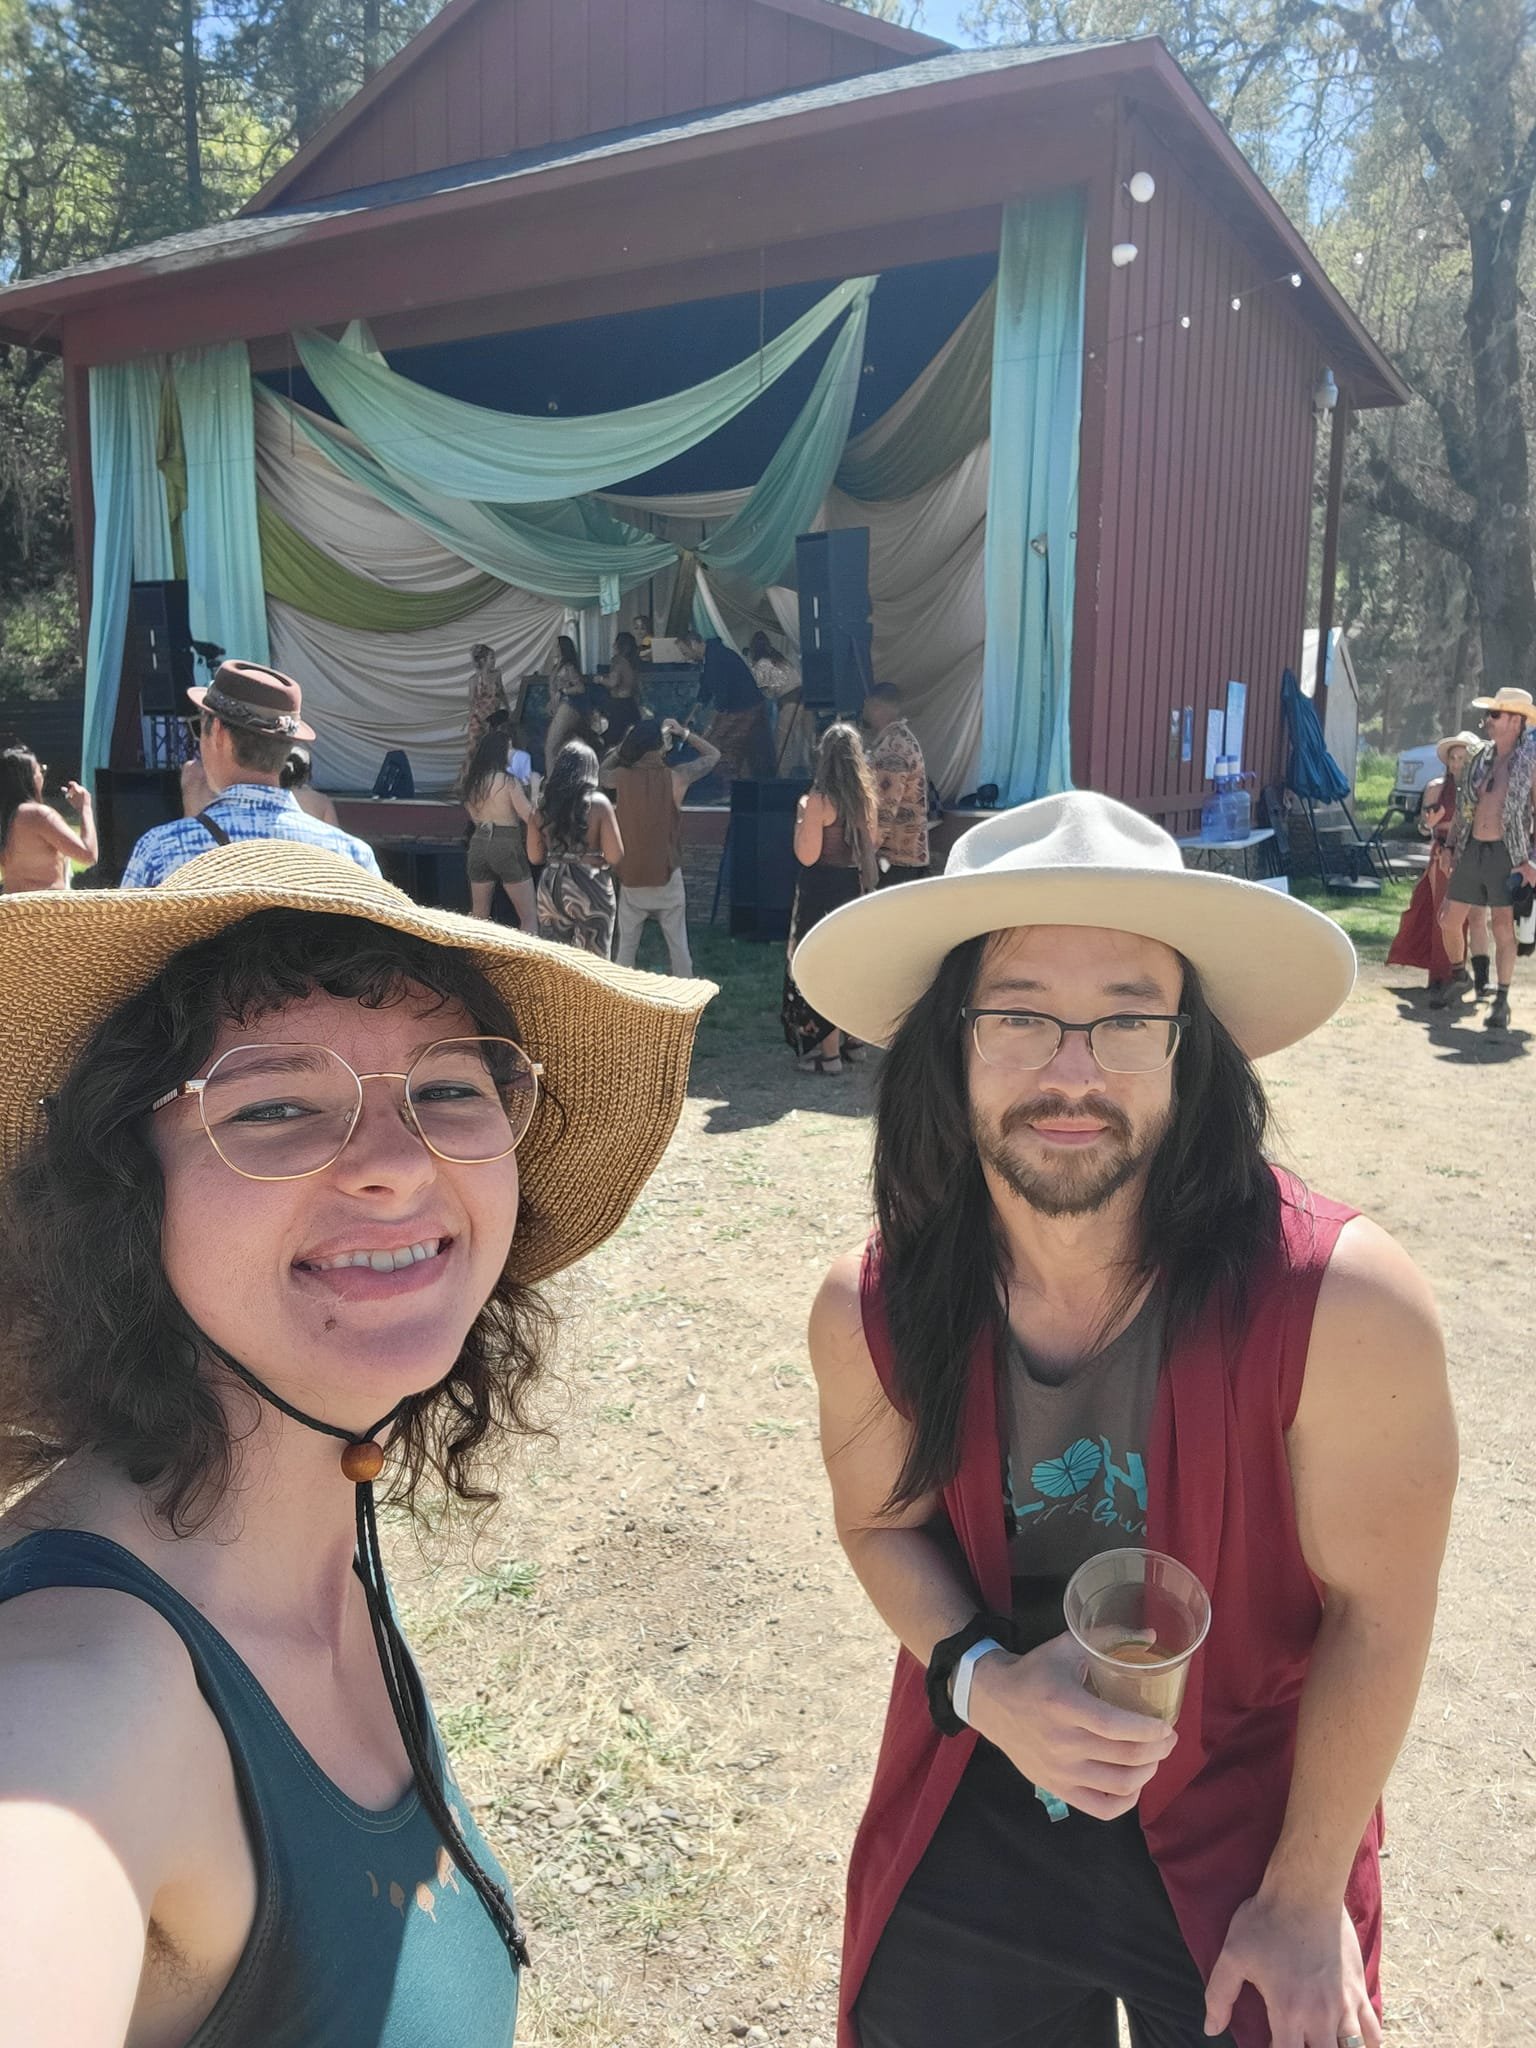 💗 ⚡High Vibe Fest 2024⚡ 💗

Highlights:
💃🏼Dancing with friends
☀️Napping in the Sun 
😴Guiding a radical rest practice 
🍯Activation's performance 
🪽Deya Dova's show 
💙Brotha Jag's set with his drum dancers 
👽Nature's comedy show 
☕Cacao with N